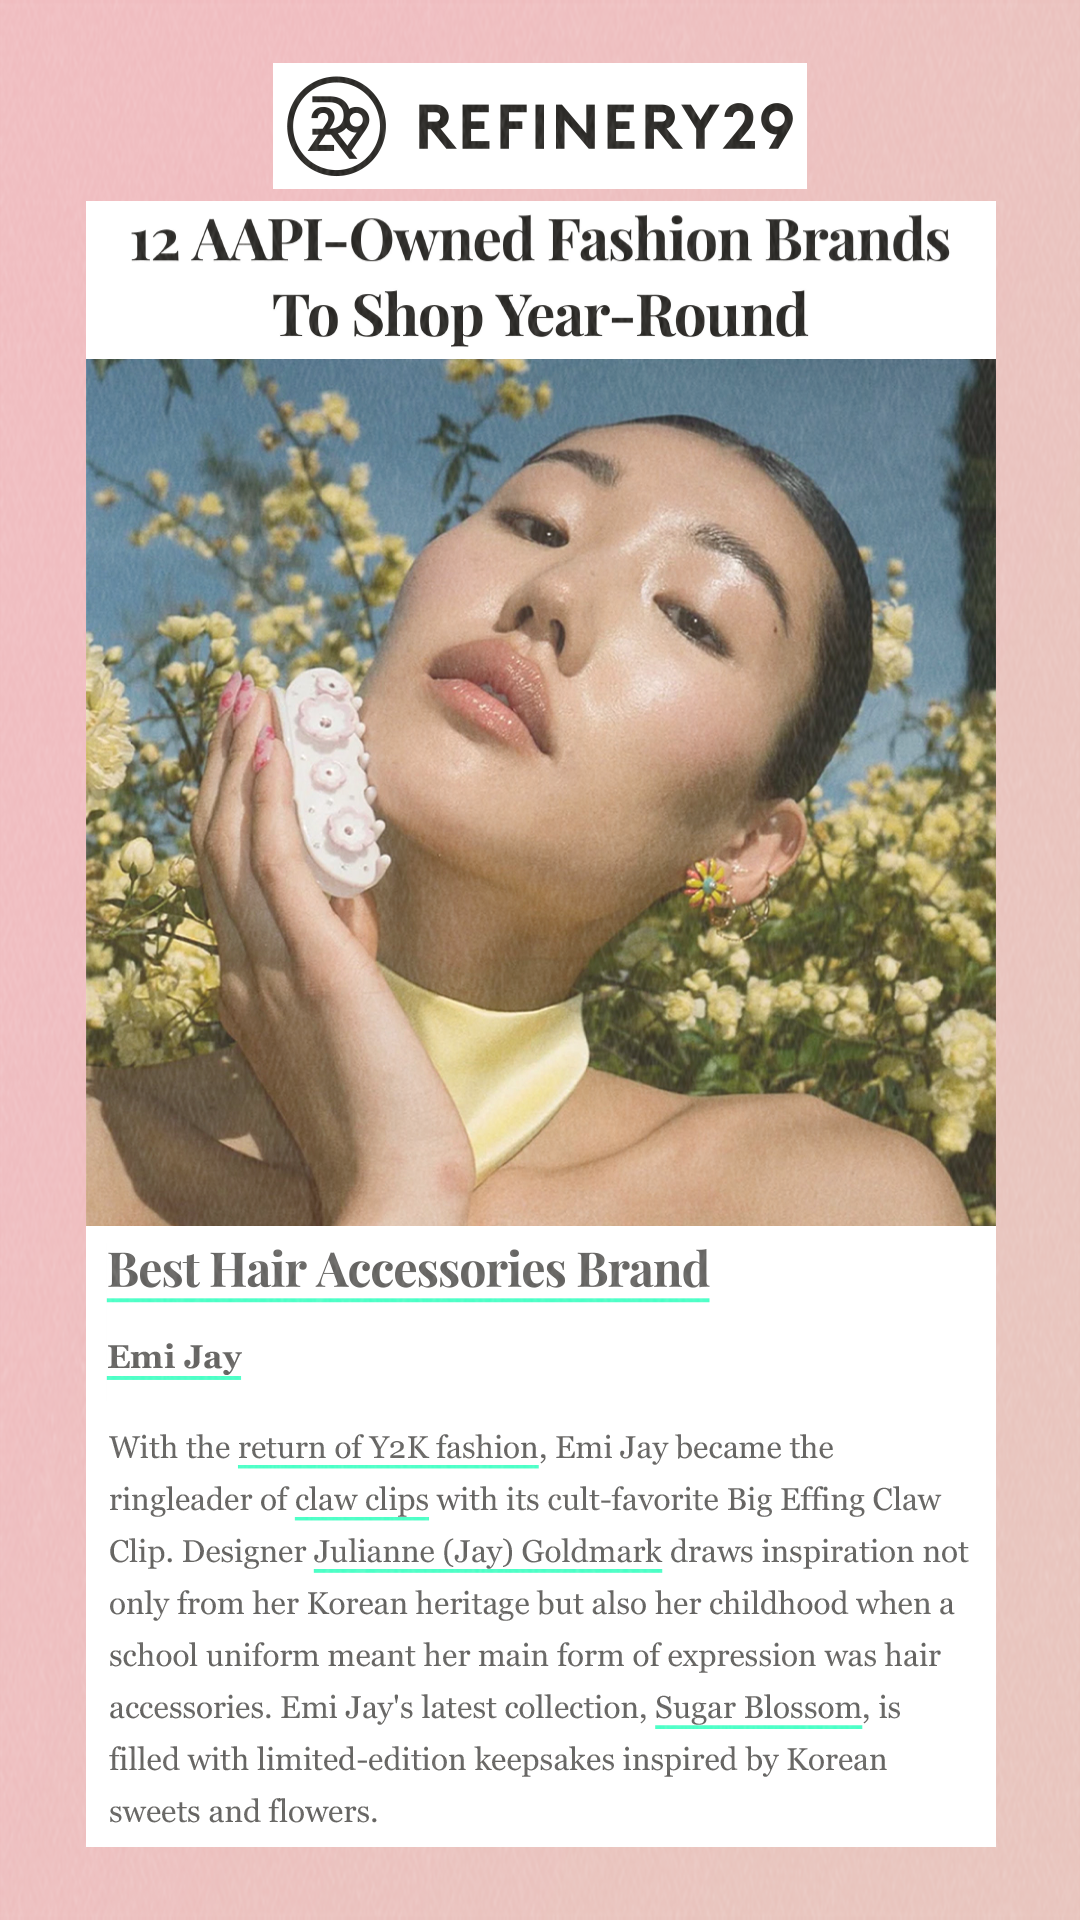 12 AAPI-Owned Fashion Brands To Shop Year-Round Best Hair Accessories Brand Emi Jay With the return of Y2K fashion, Emi Jay became the ringleader of claw clips with its cult-favorite Big Effing Claw Clip. Designer Julianne (Jay) Goldmark draws inspiration not only from her Korean heritage but also her childhood when a school uniform meant her main form of expression was hair accessories. Emi Jay's latest collection, Sugar Blossom, is filled with limited-edition keepsakes inspired by Korean sweets and flowers.